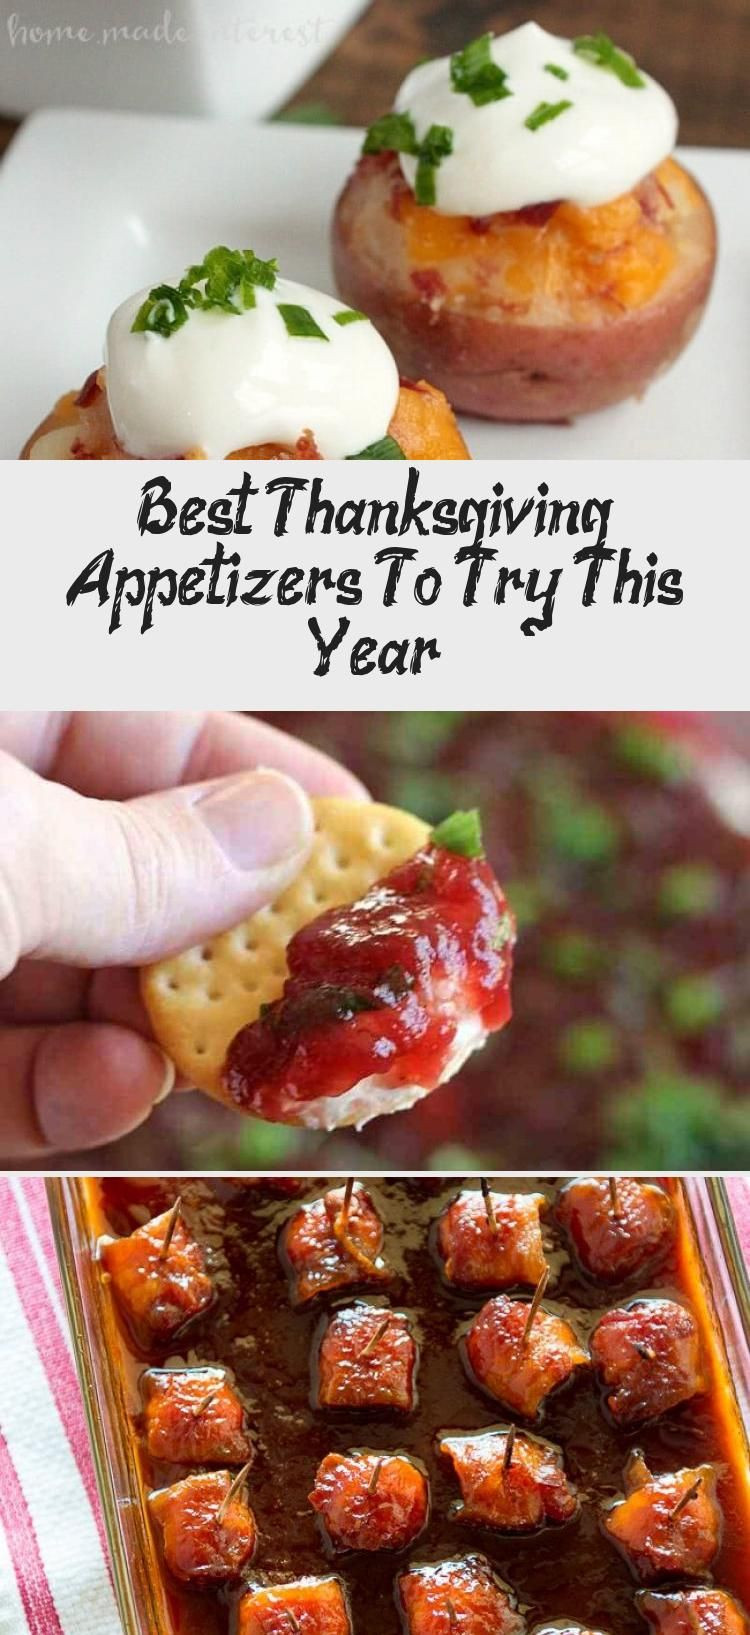 Thanksgiving 2019 Appetizers
 Best Thanksgiving Appetizers To Try This Year